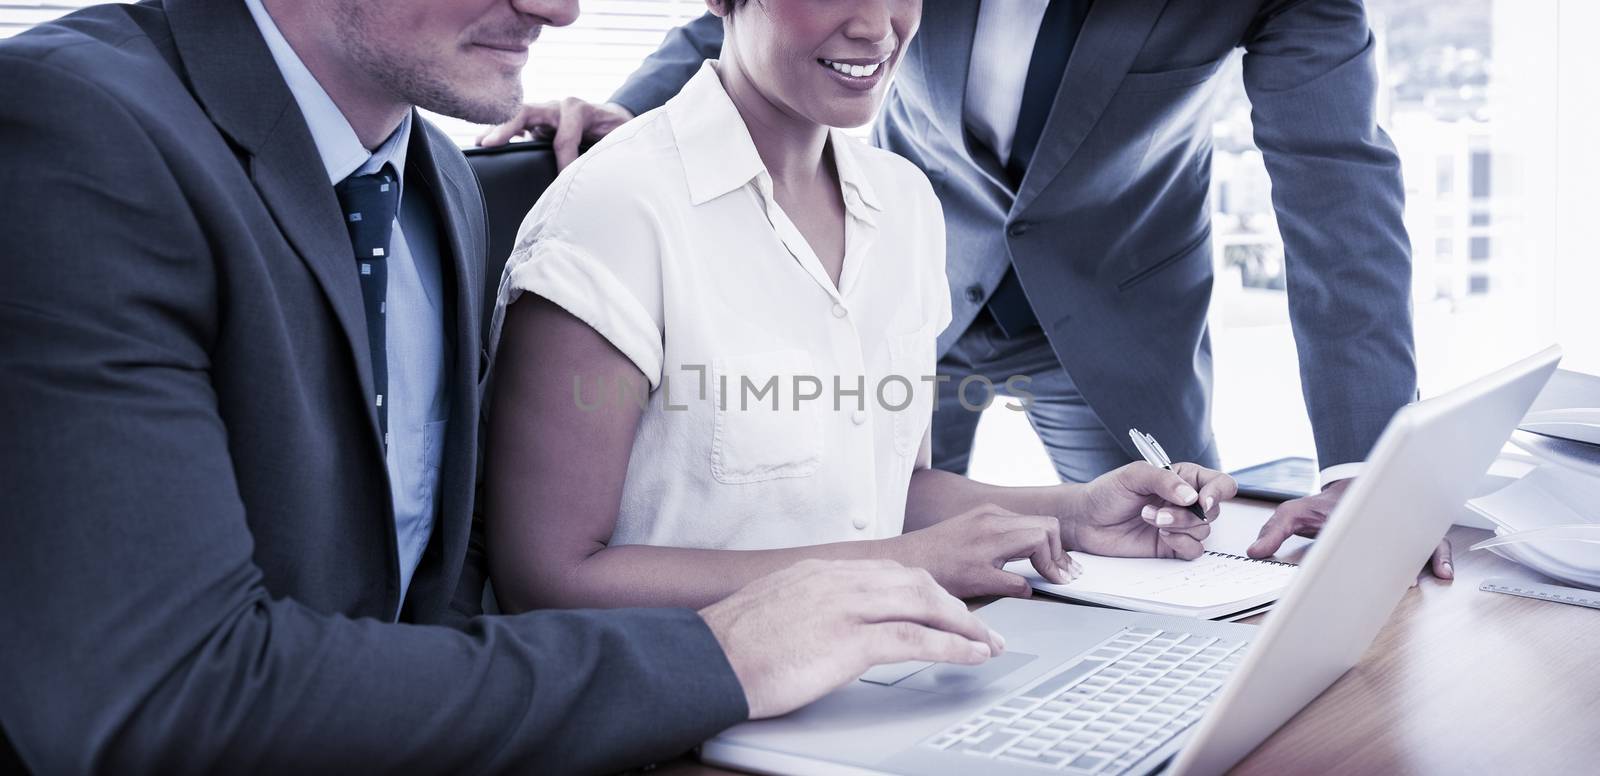 Smartly dressed young colleagues using laptop at office desk